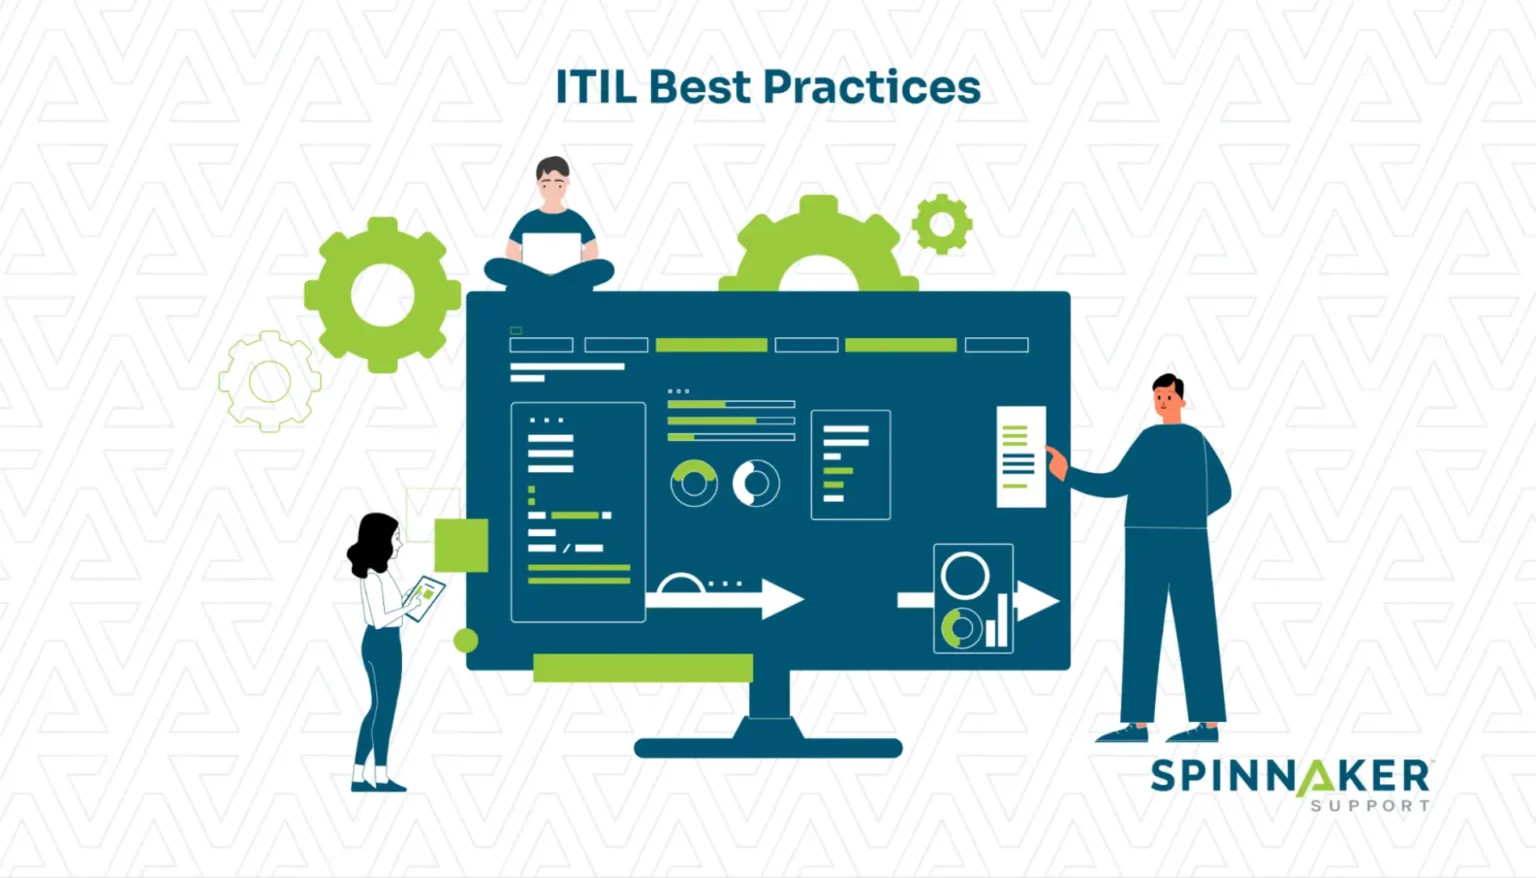 A guide to implement ITIL best practices